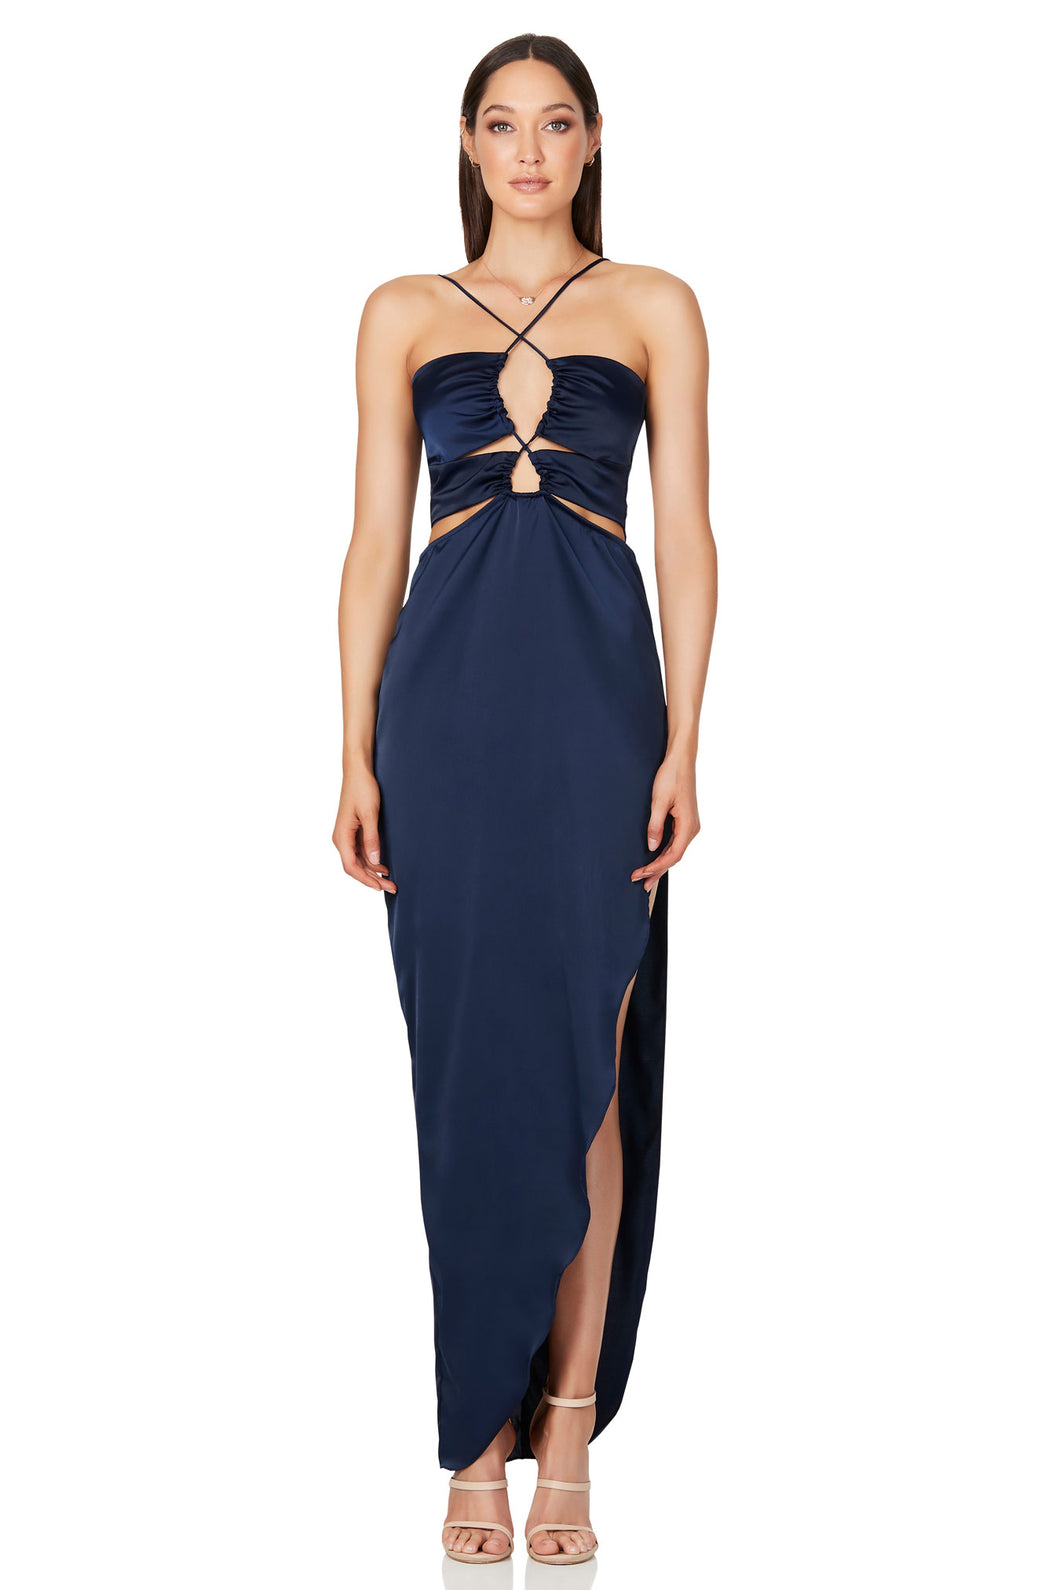 NOOKIE MELODY GOWN- NAVY